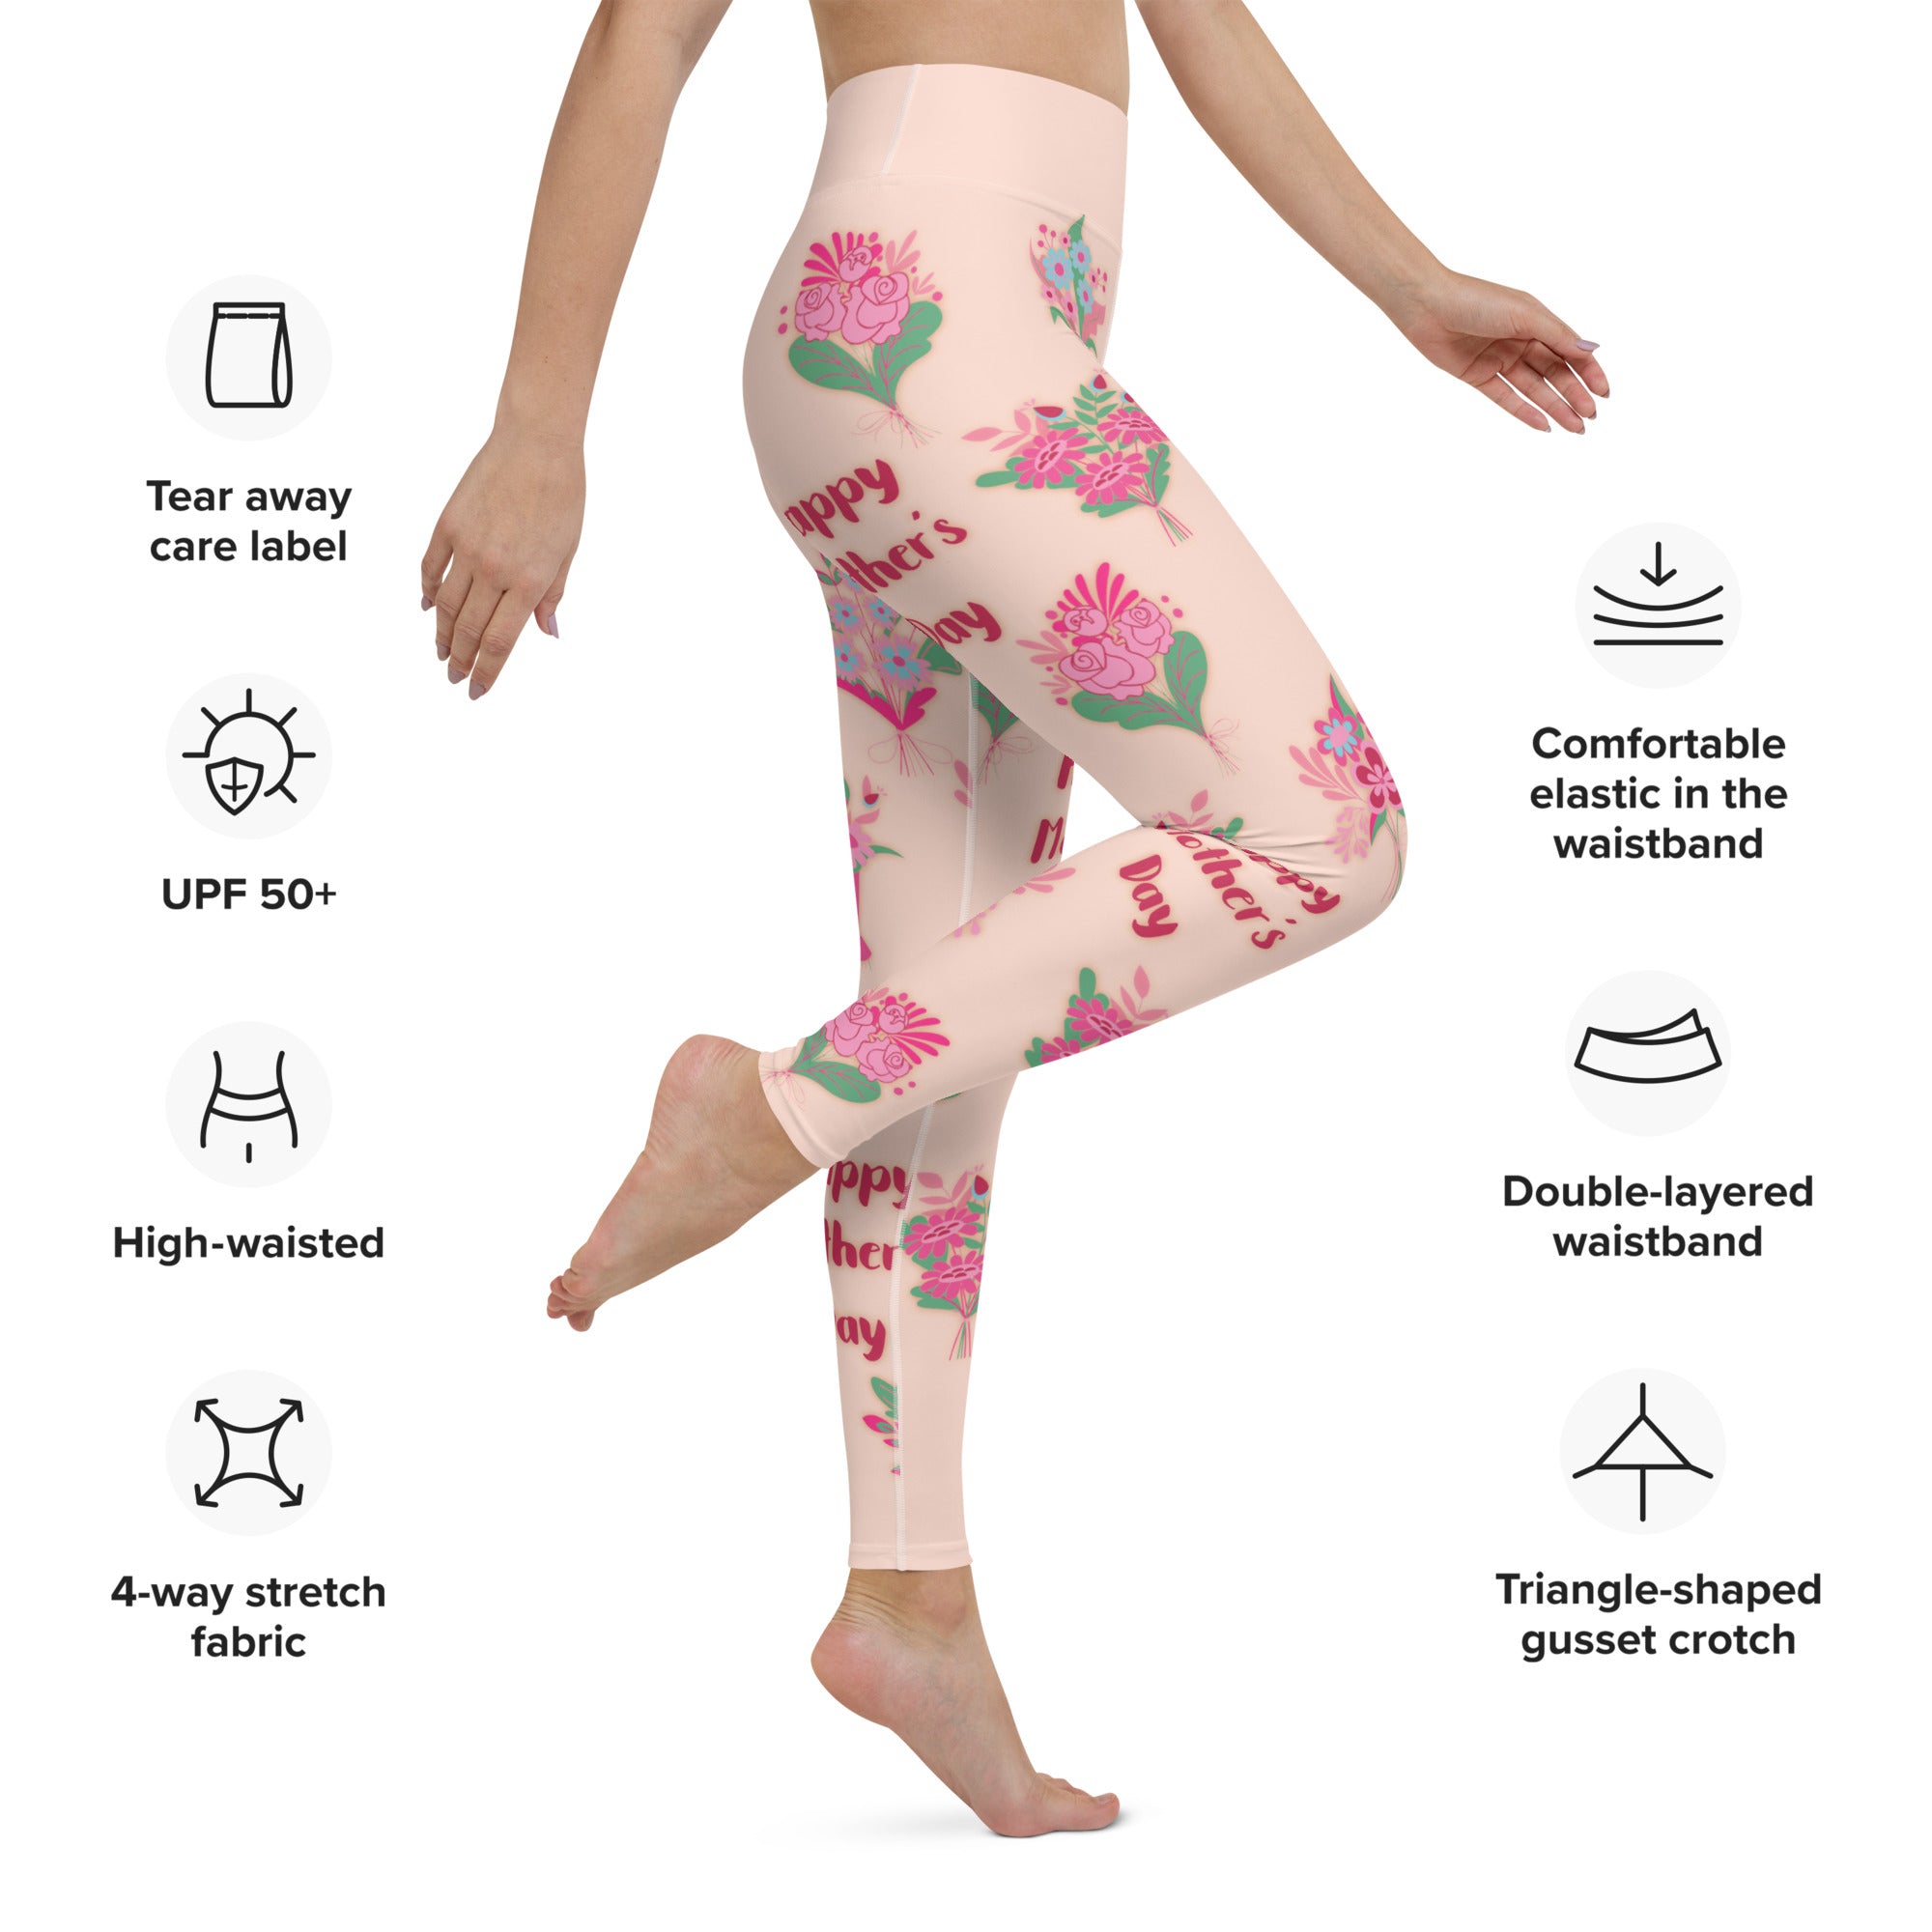 Mother's Day Bouquet Yoga Leggings